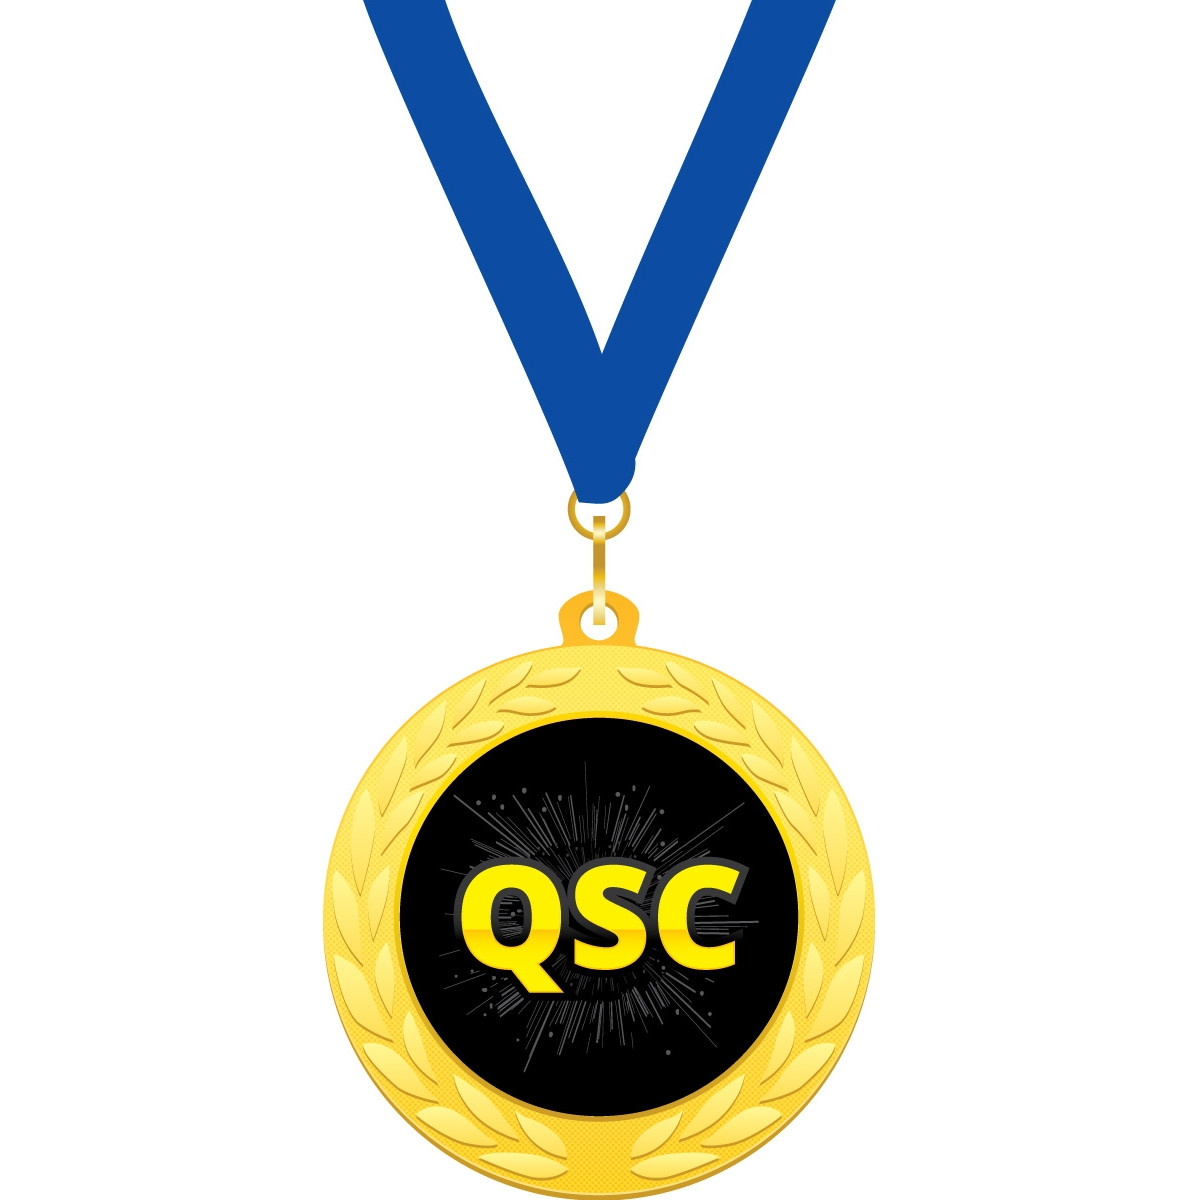 Custom 2 in. Gold Medallion with Blue Neck Ribbon (QSC)